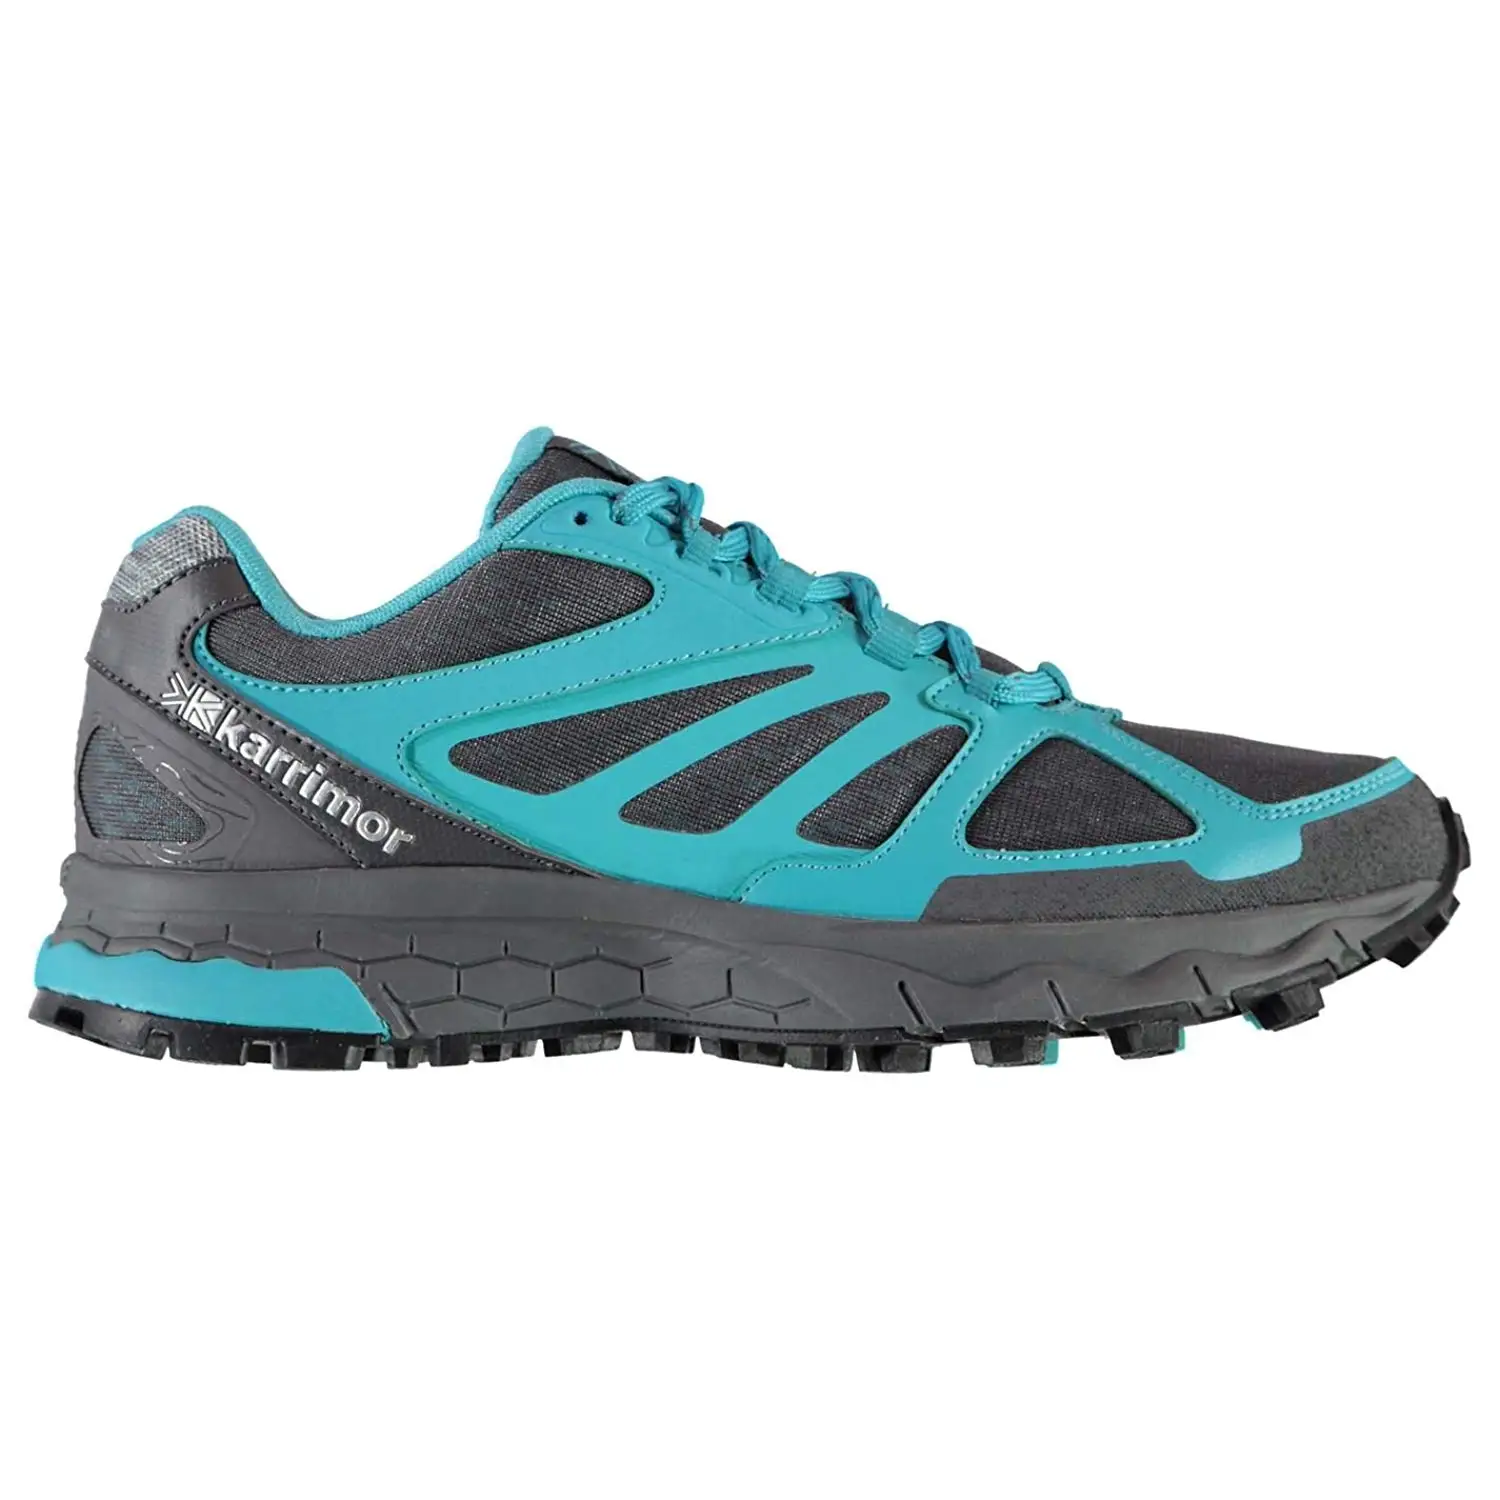 karrimor safety trainers